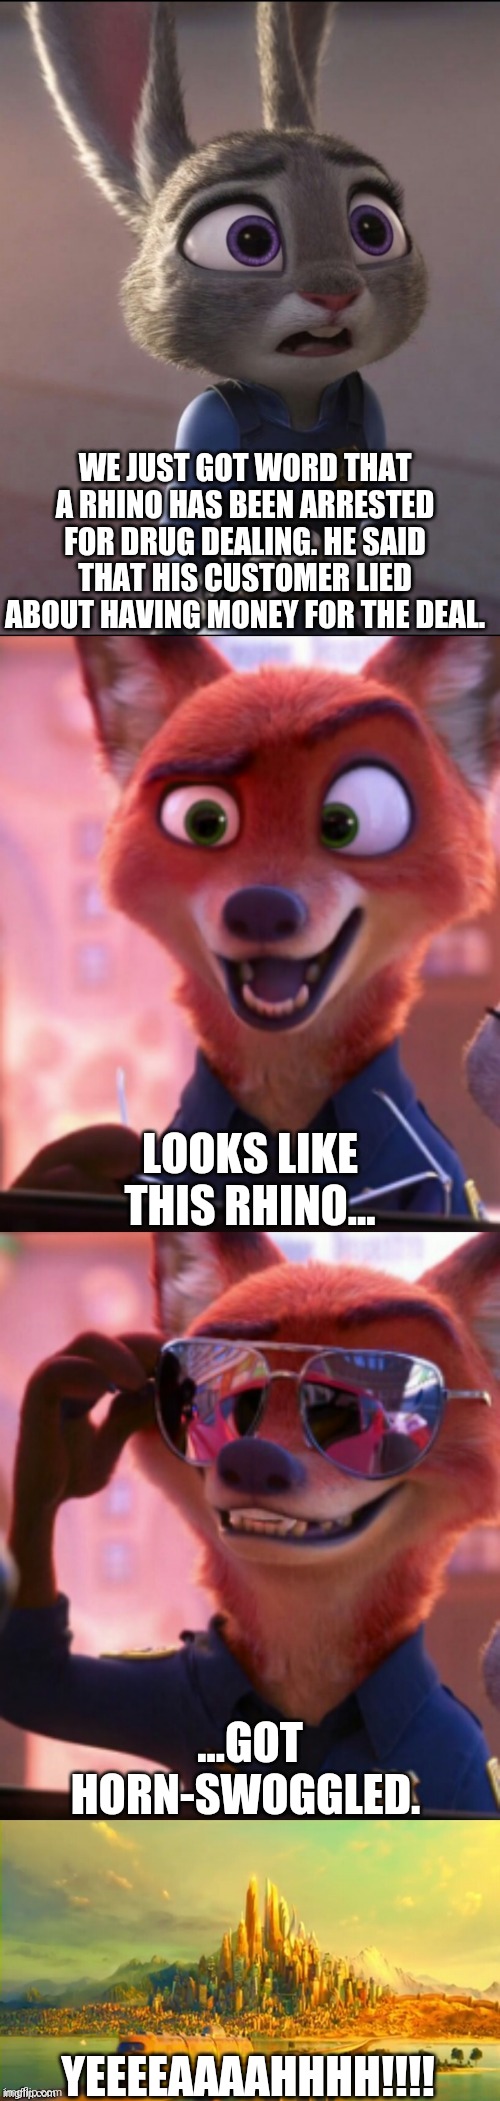 CSI: Zootopia 25 | WE JUST GOT WORD THAT A RHINO HAS BEEN ARRESTED FOR DRUG DEALING. HE SAID THAT HIS CUSTOMER LIED ABOUT HAVING MONEY FOR THE DEAL. LOOKS LIKE THIS RHINO... ...GOT HORN-SWOGGLED. YEEEEAAAAHHHH!!!! | image tagged in csi zootopia,zootopia,judy hopps,nick wilde,parody,funny | made w/ Imgflip meme maker